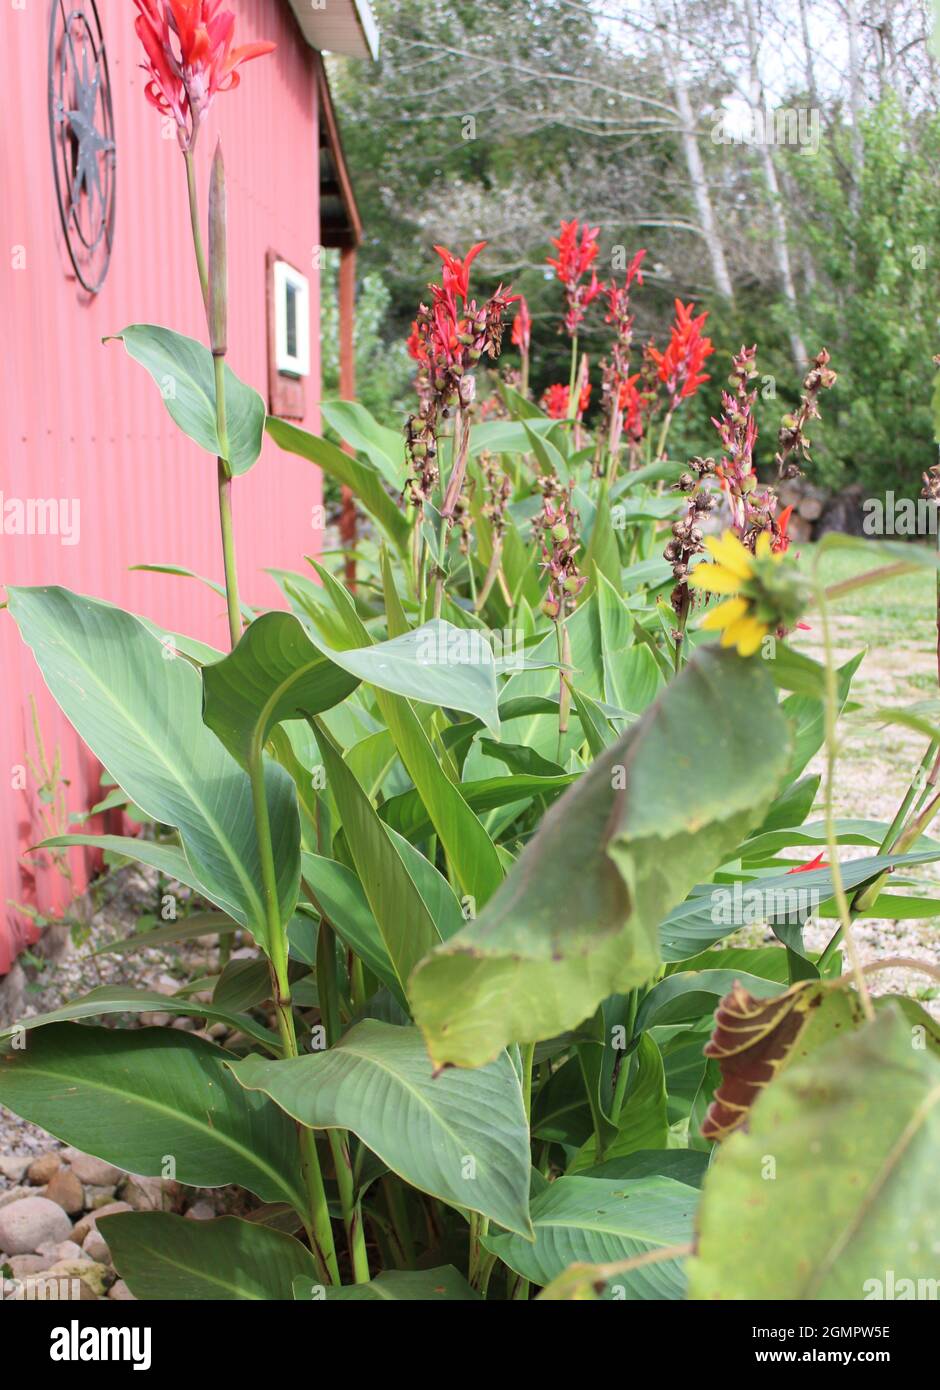 Cannas flowers along a red barn. Stock Photo